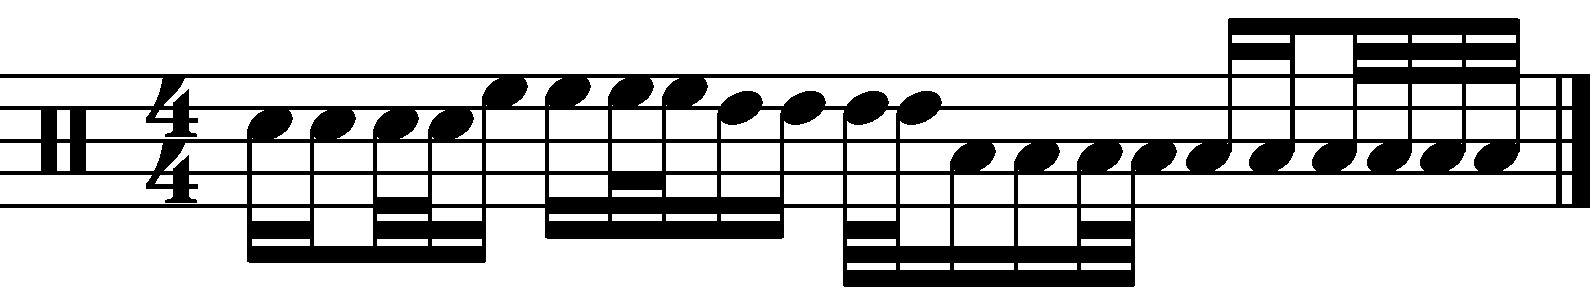 Syncopated 16th note 33334 fills with decorative 32nds